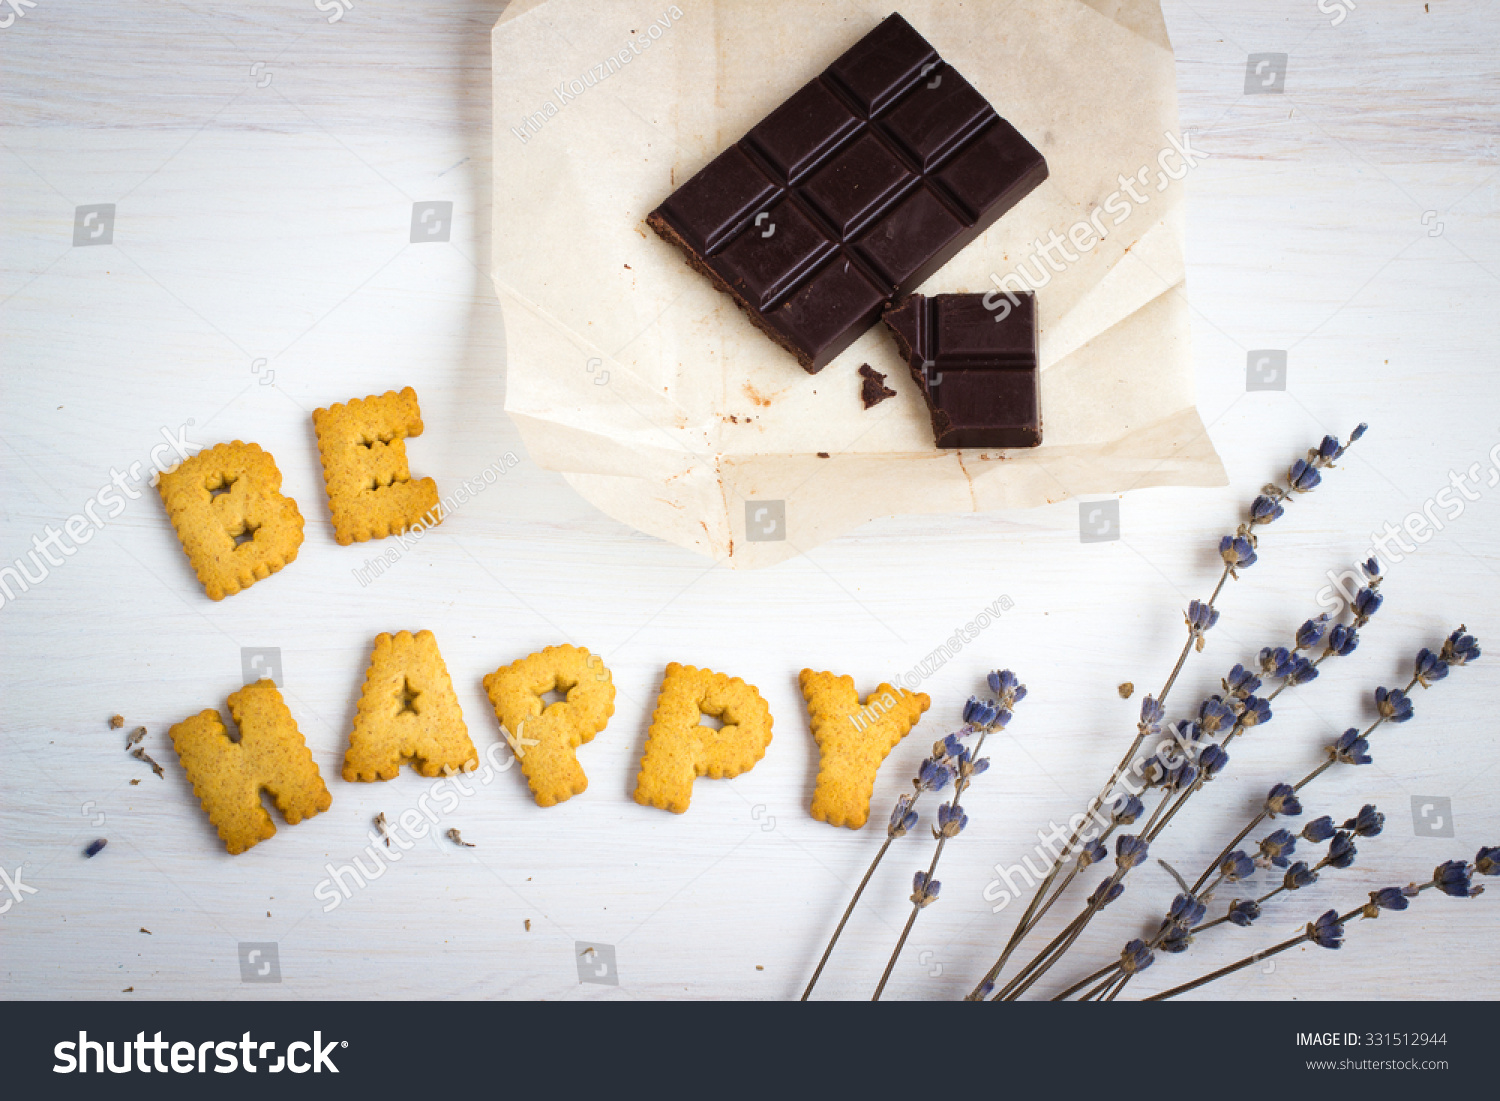 Quote BE HAPPY. Still life image with biscuits, organic chocolate and vintage cup of green tea white wooden background. Top view collage made of biscuits. Retro toned and instagram filtered image. #331512944